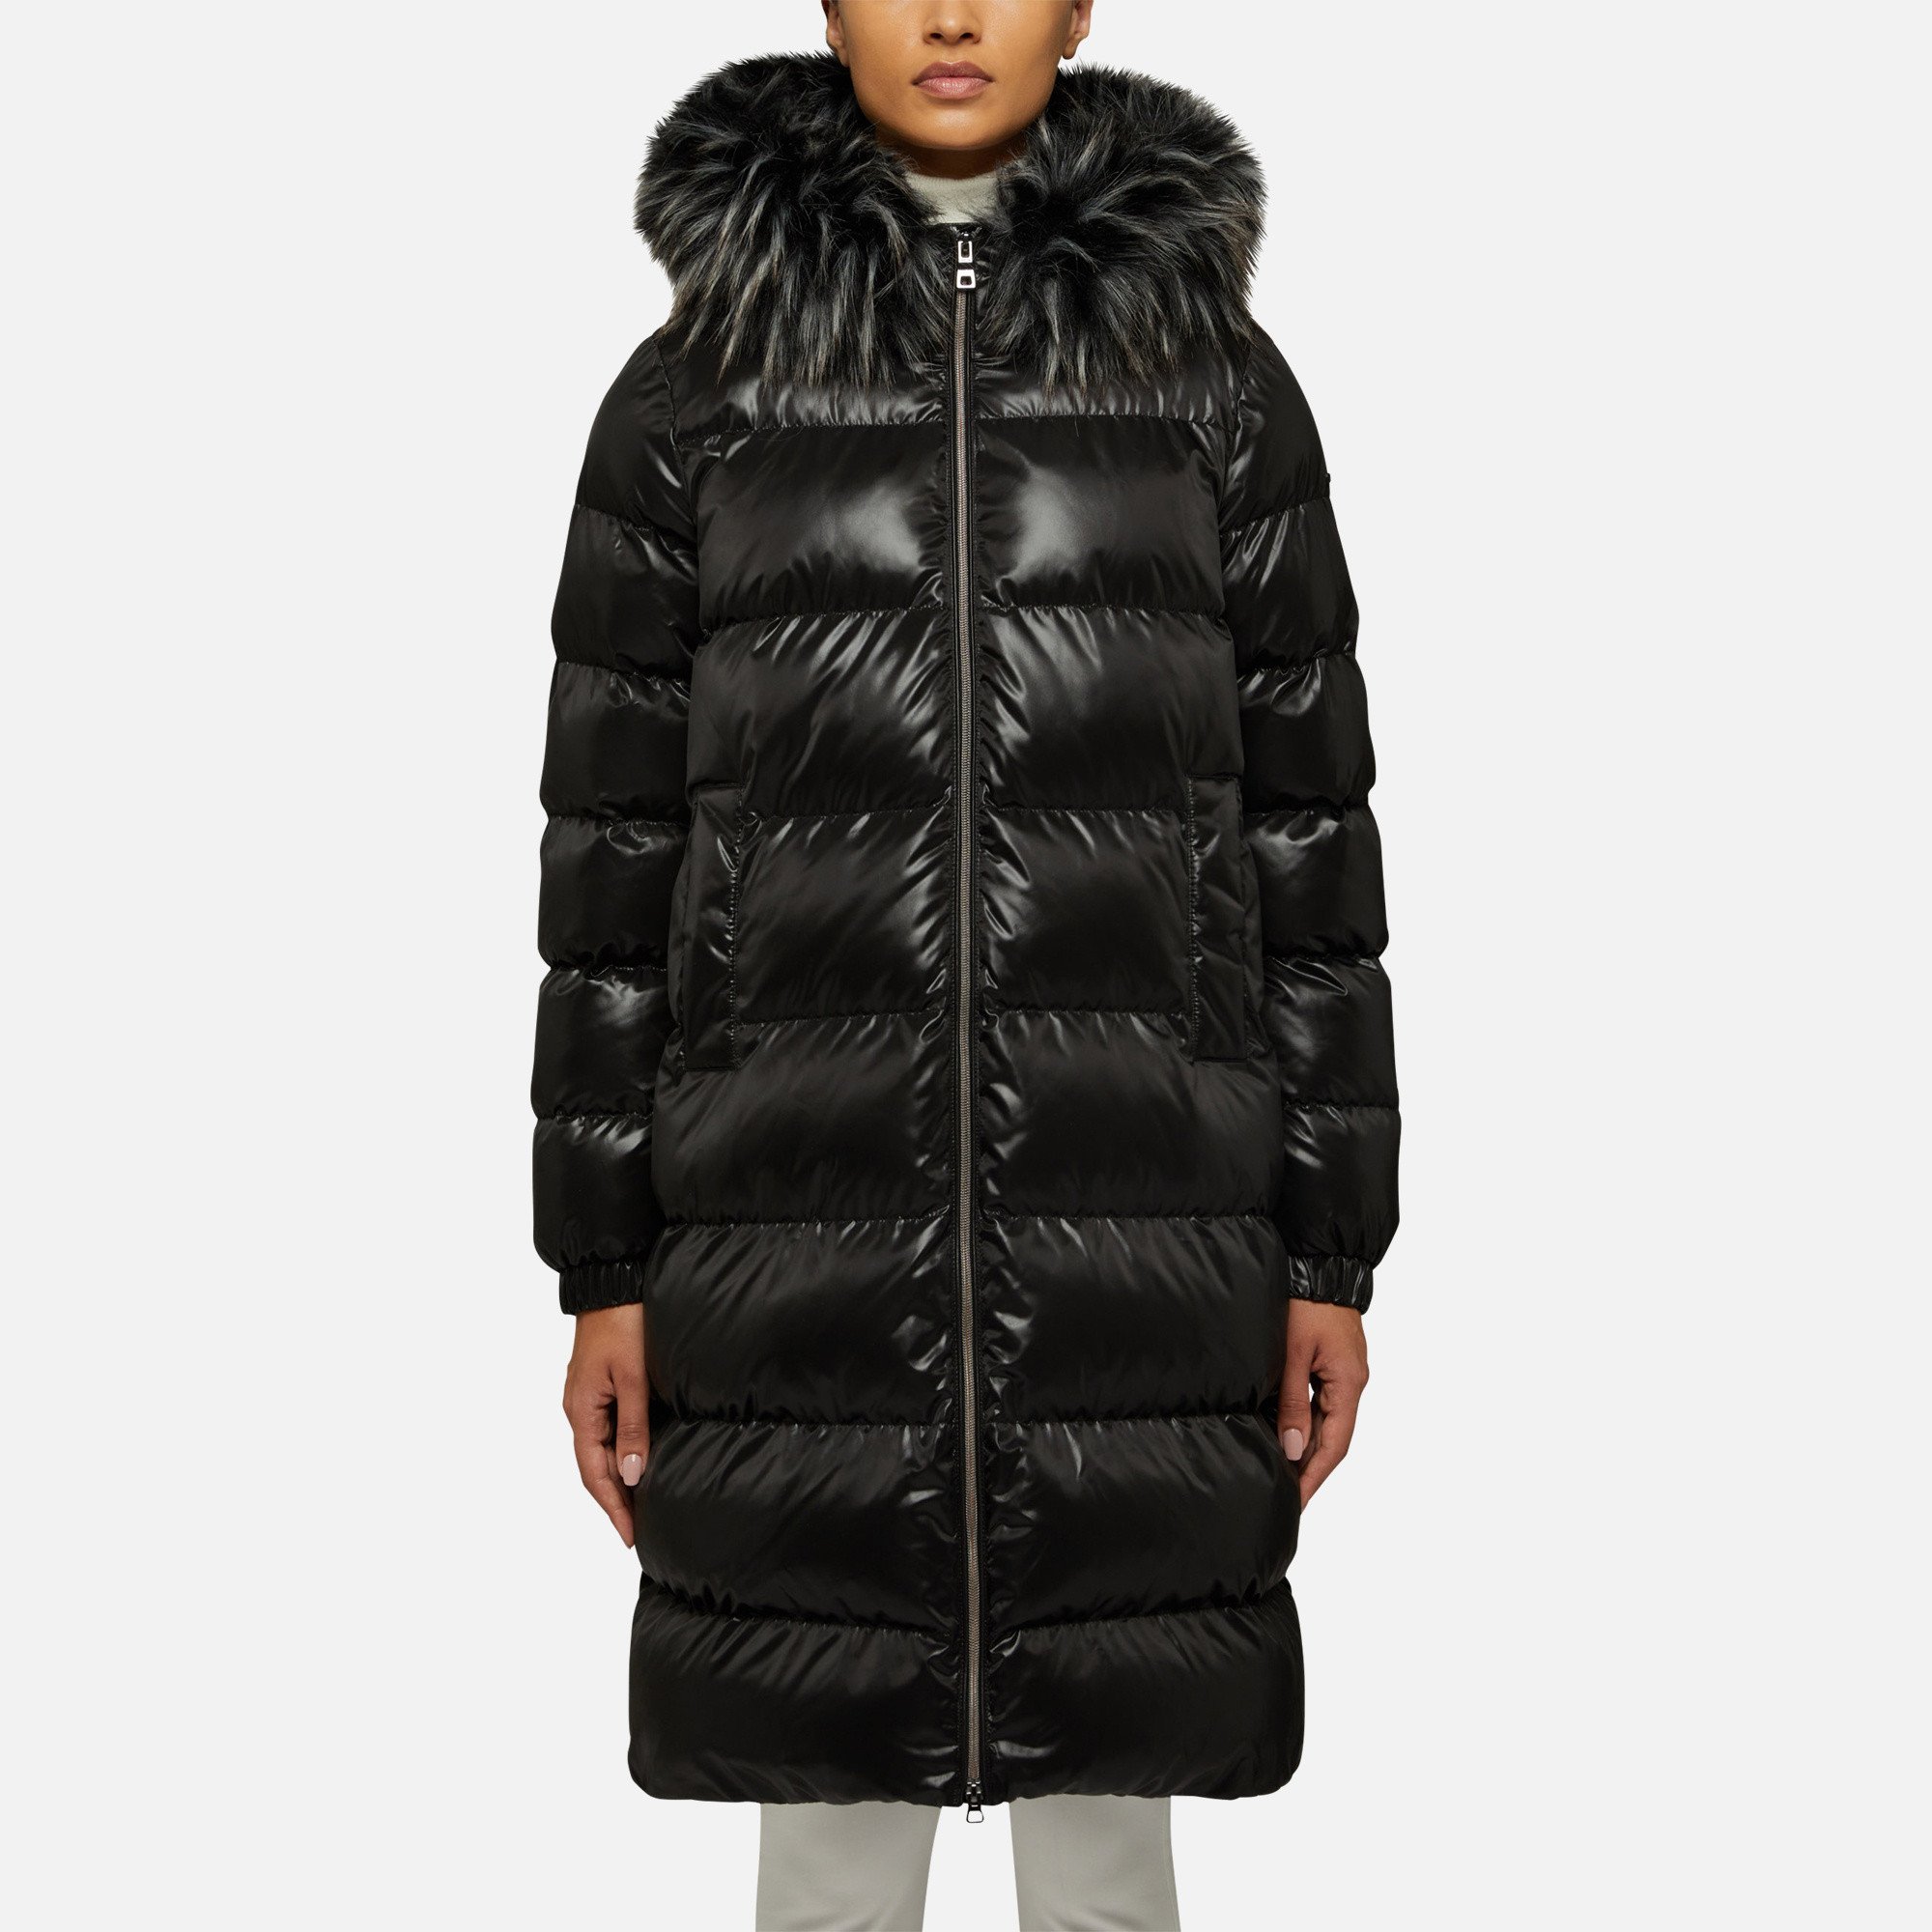 Long padded women's jacket, with maxi hood edged with faux fur.